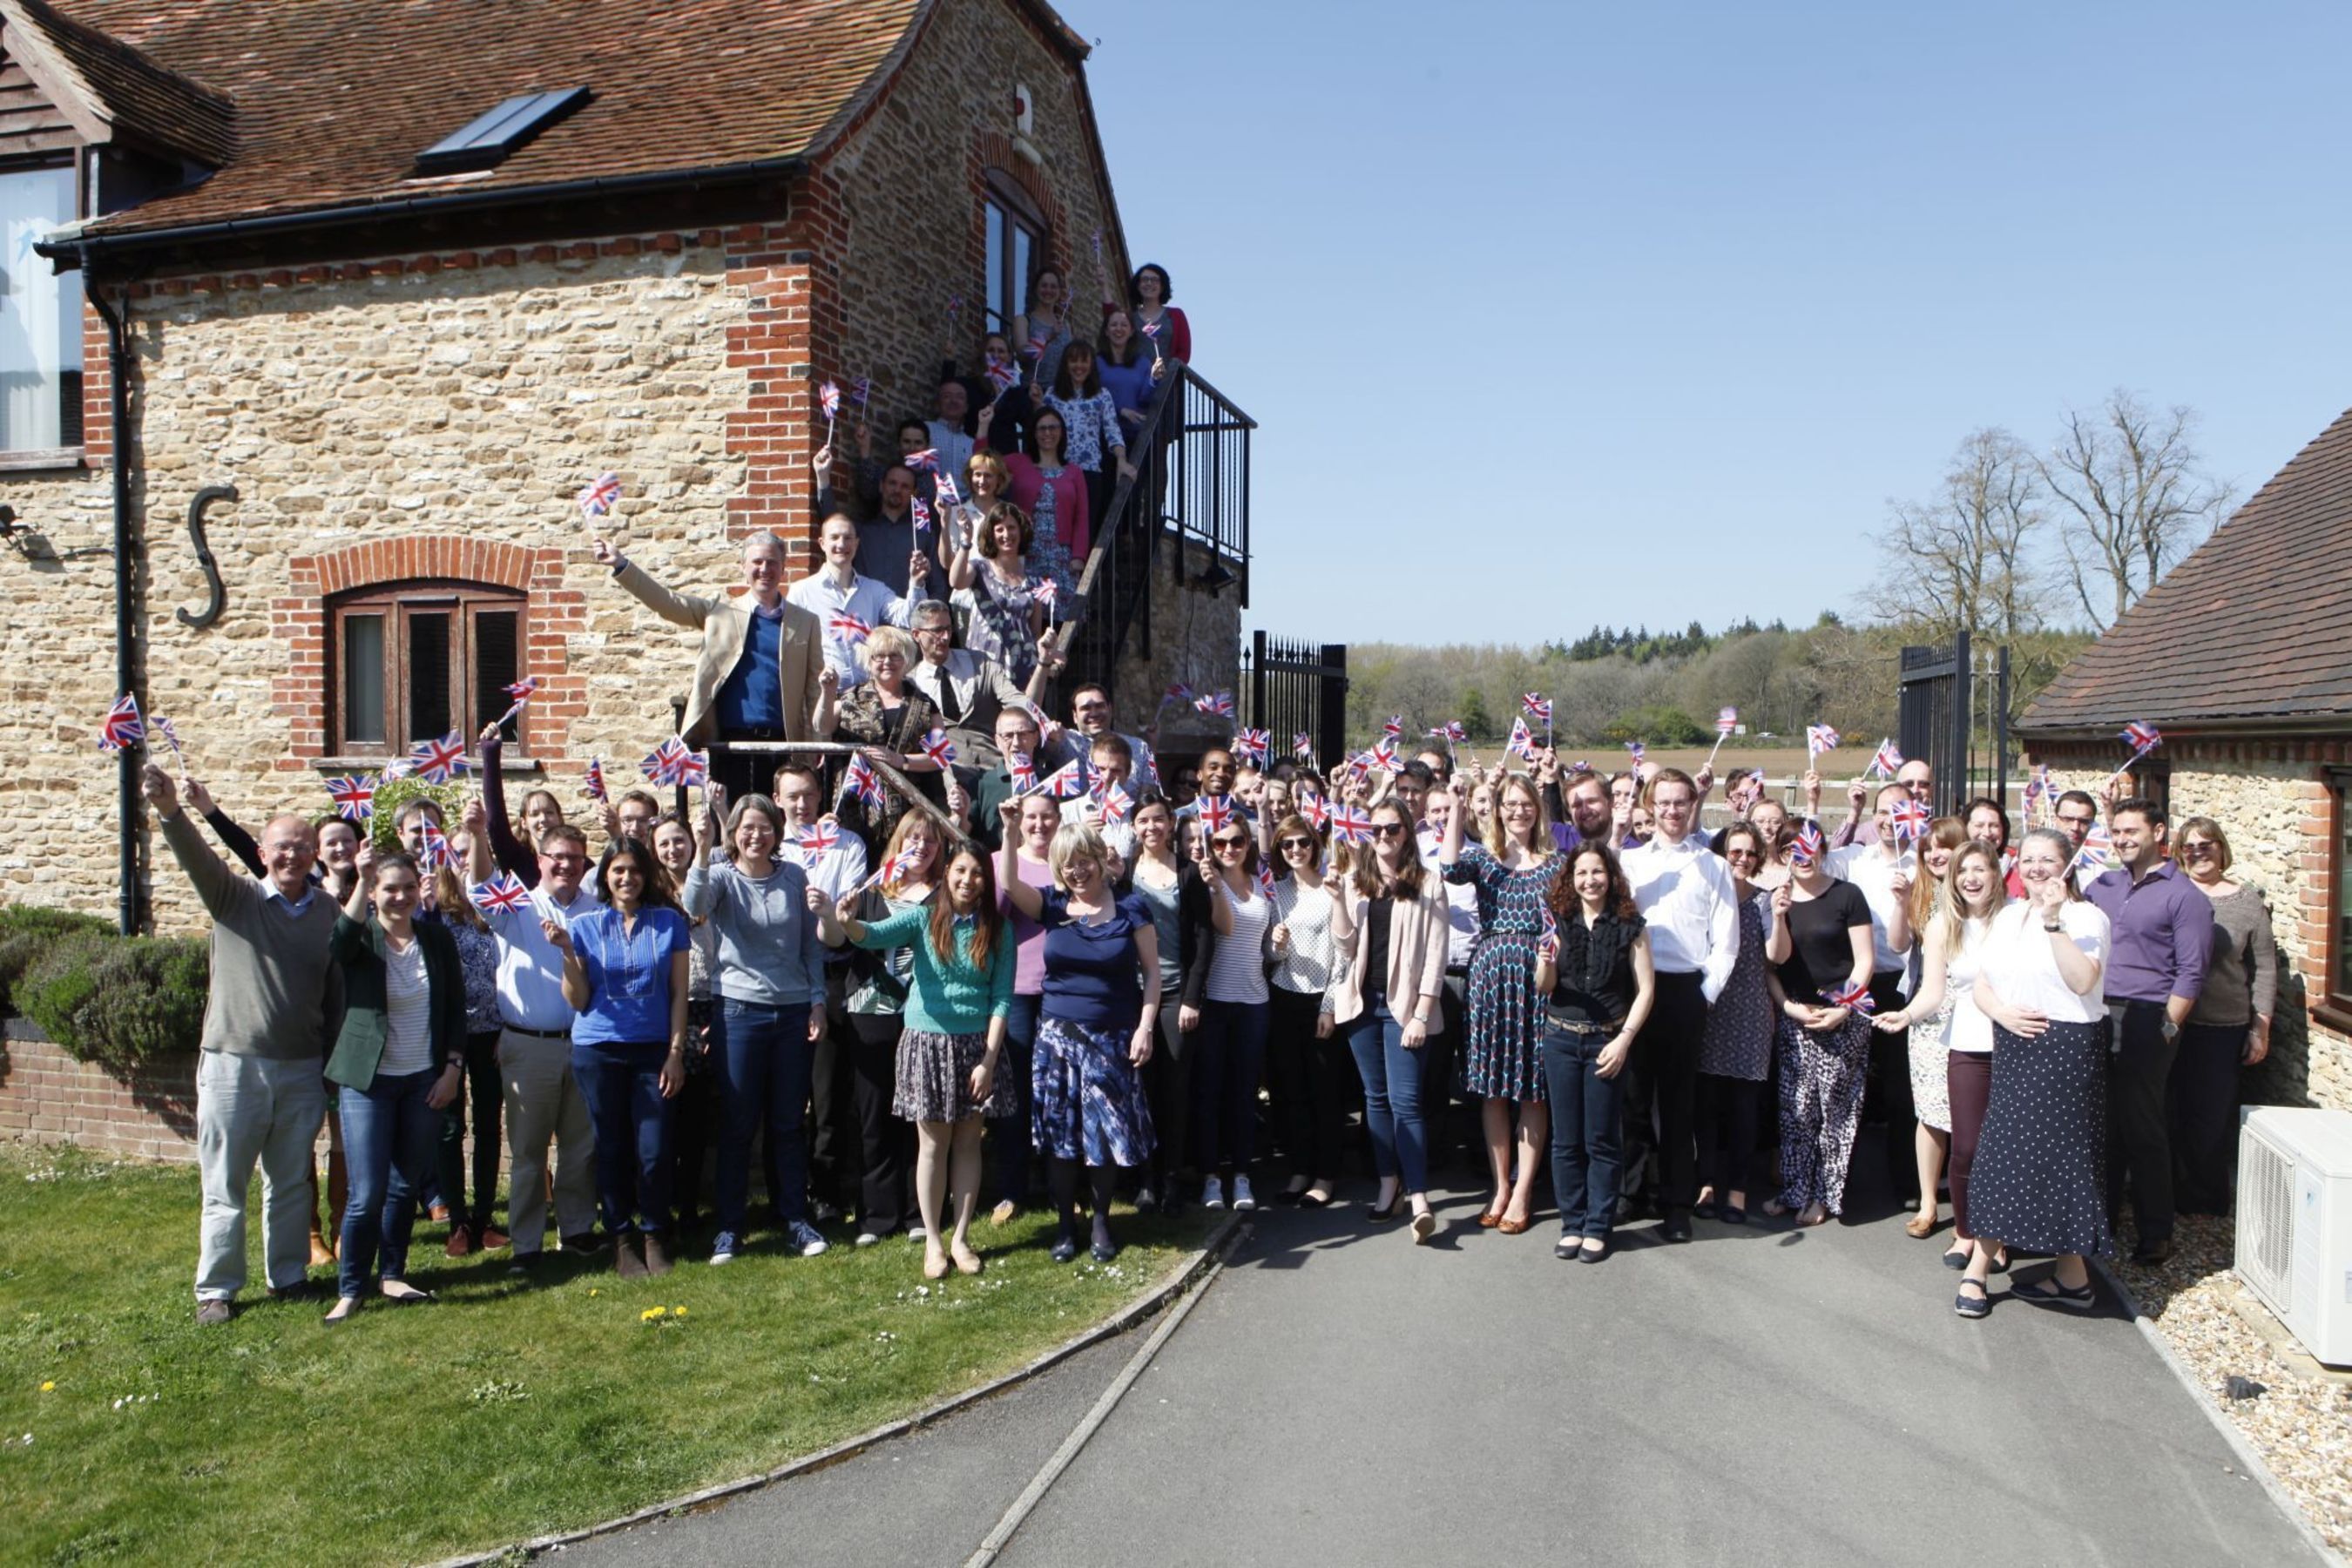 Employees of Oxford PharmaGenesis celebrating in the sunshine at the companyâeuro(TM)s headquarters in Oxford (PRNewsFoto/Oxford PharmaGenesis)